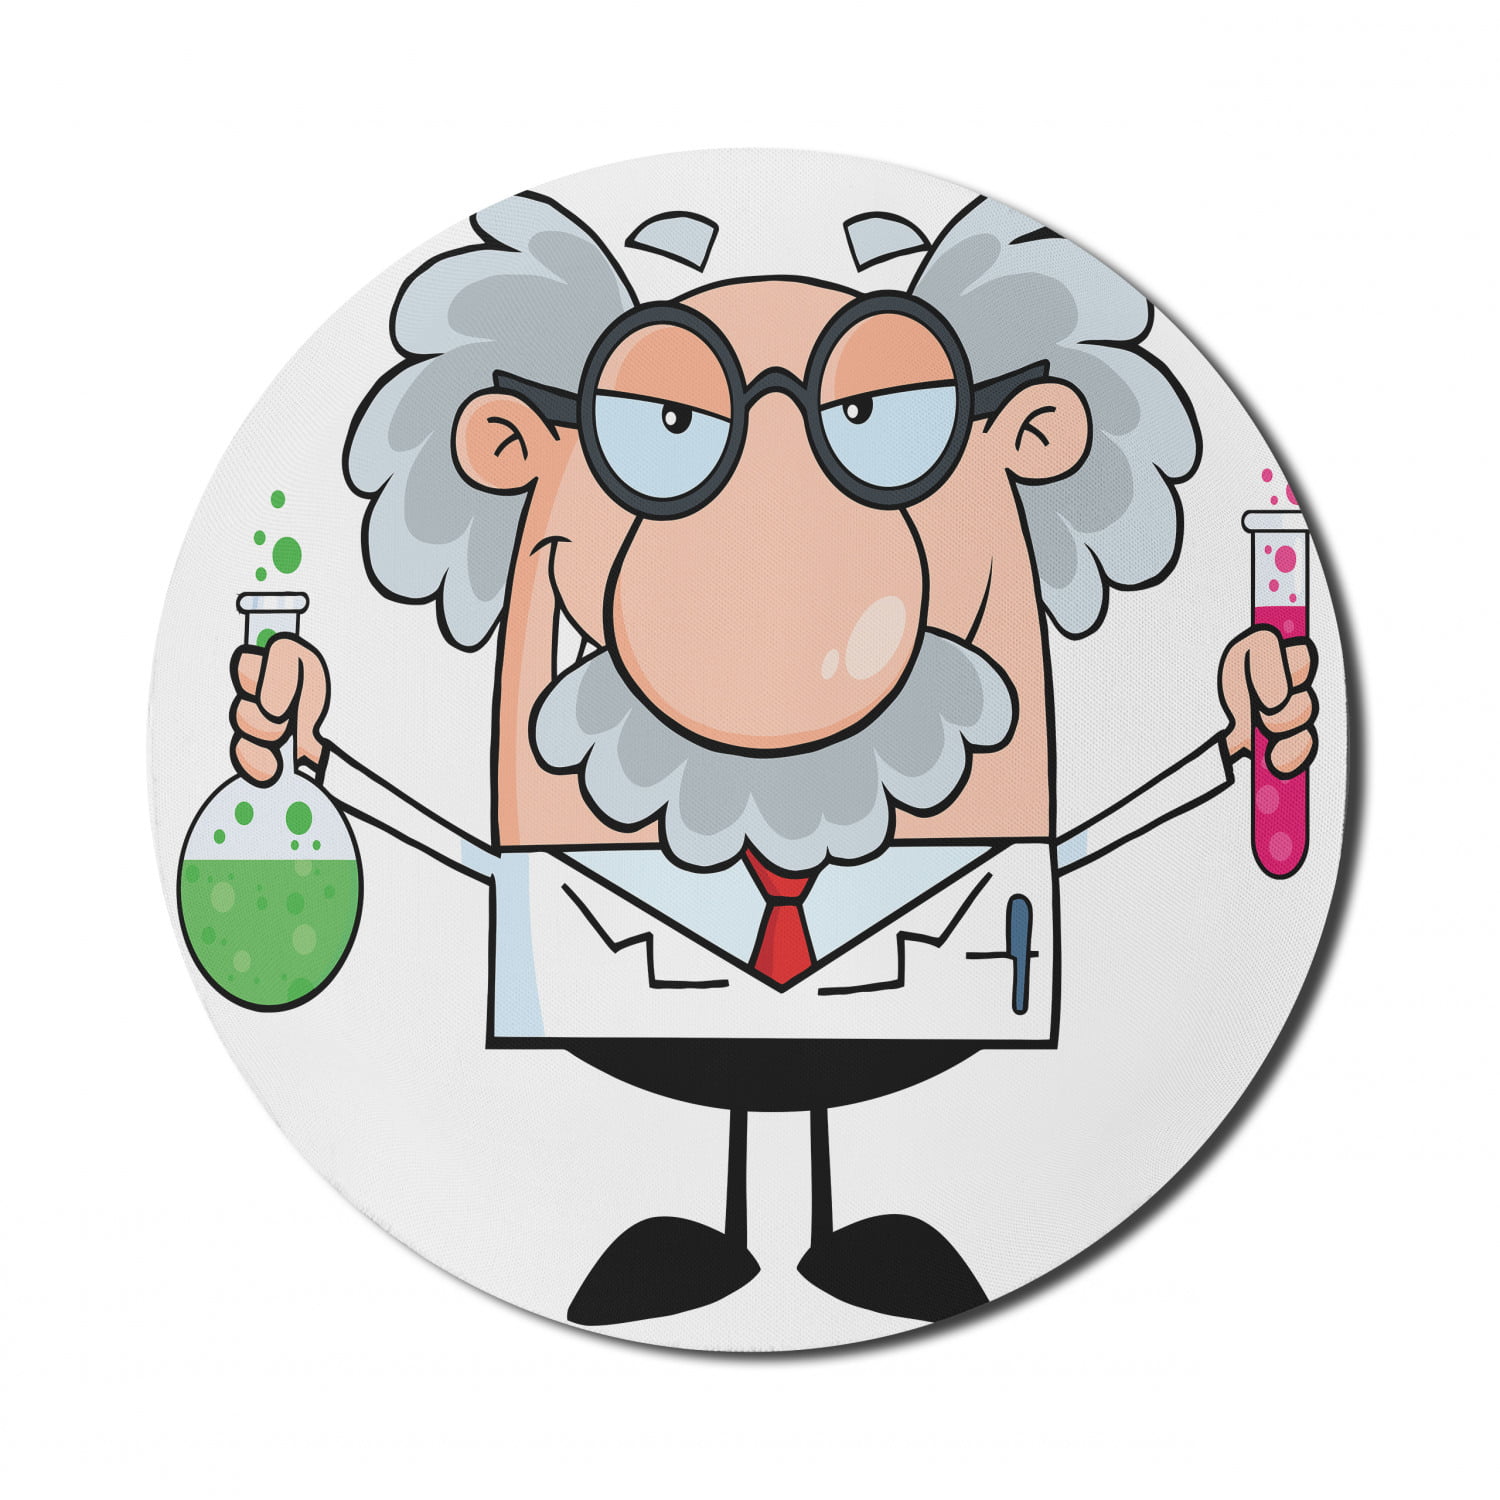 Cartoon Mouse Pad for Computers, Nursery Science Themed Composition with  Old Scientist with Glasses and Mustache, Round Non-Slip Thick Rubber Modern  Mousepad, 8